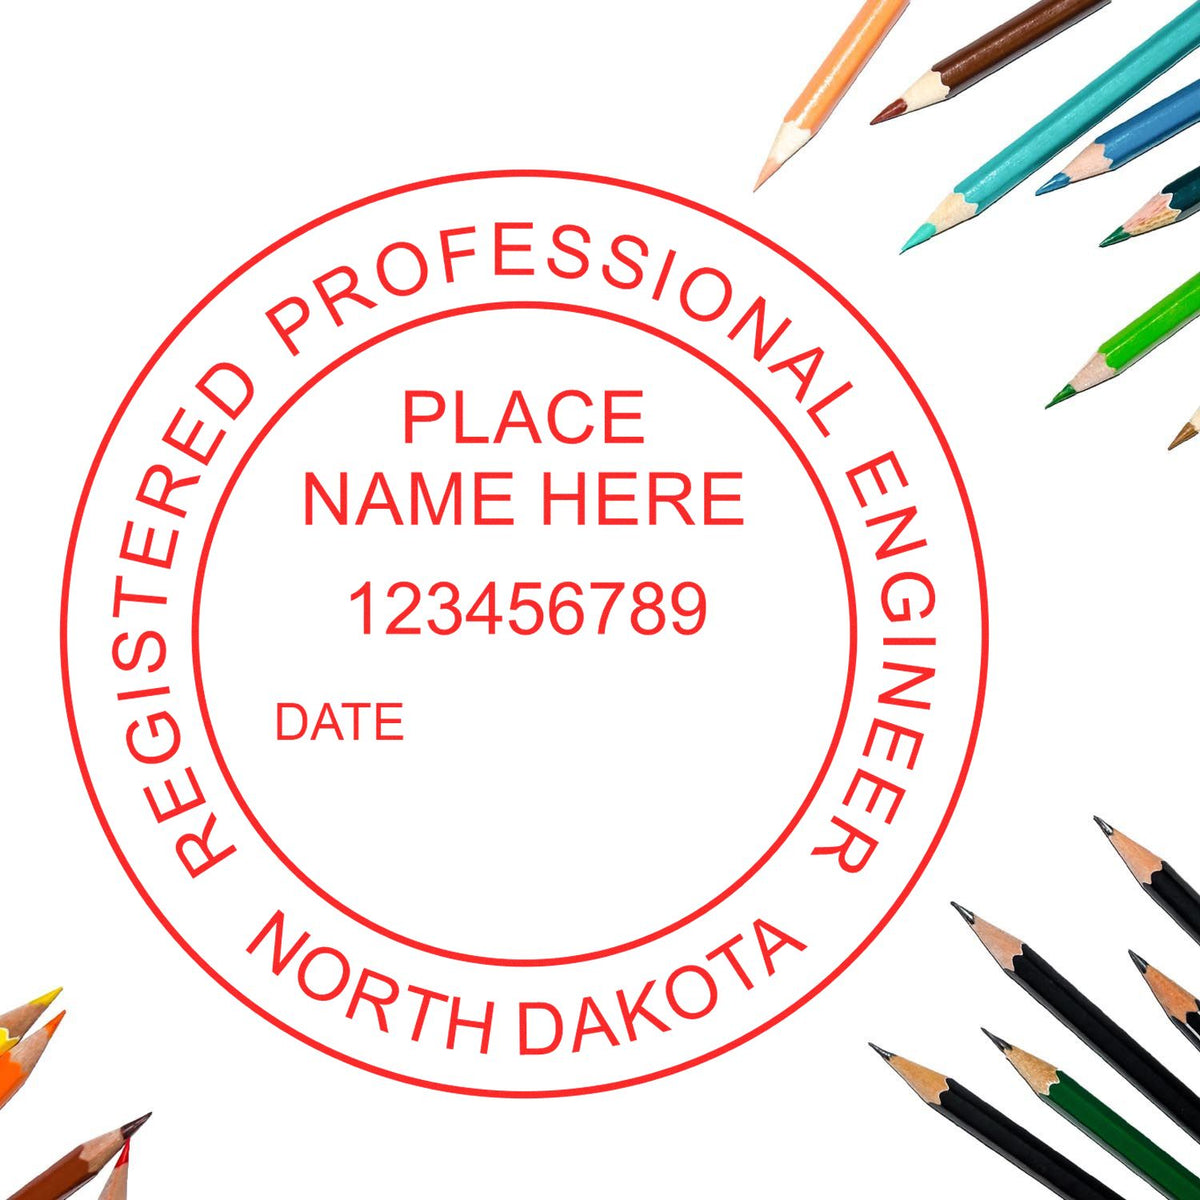 A photograph of the Digital North Dakota PE Stamp and Electronic Seal for North Dakota Engineer stamp impression reveals a vivid, professional image of the on paper.